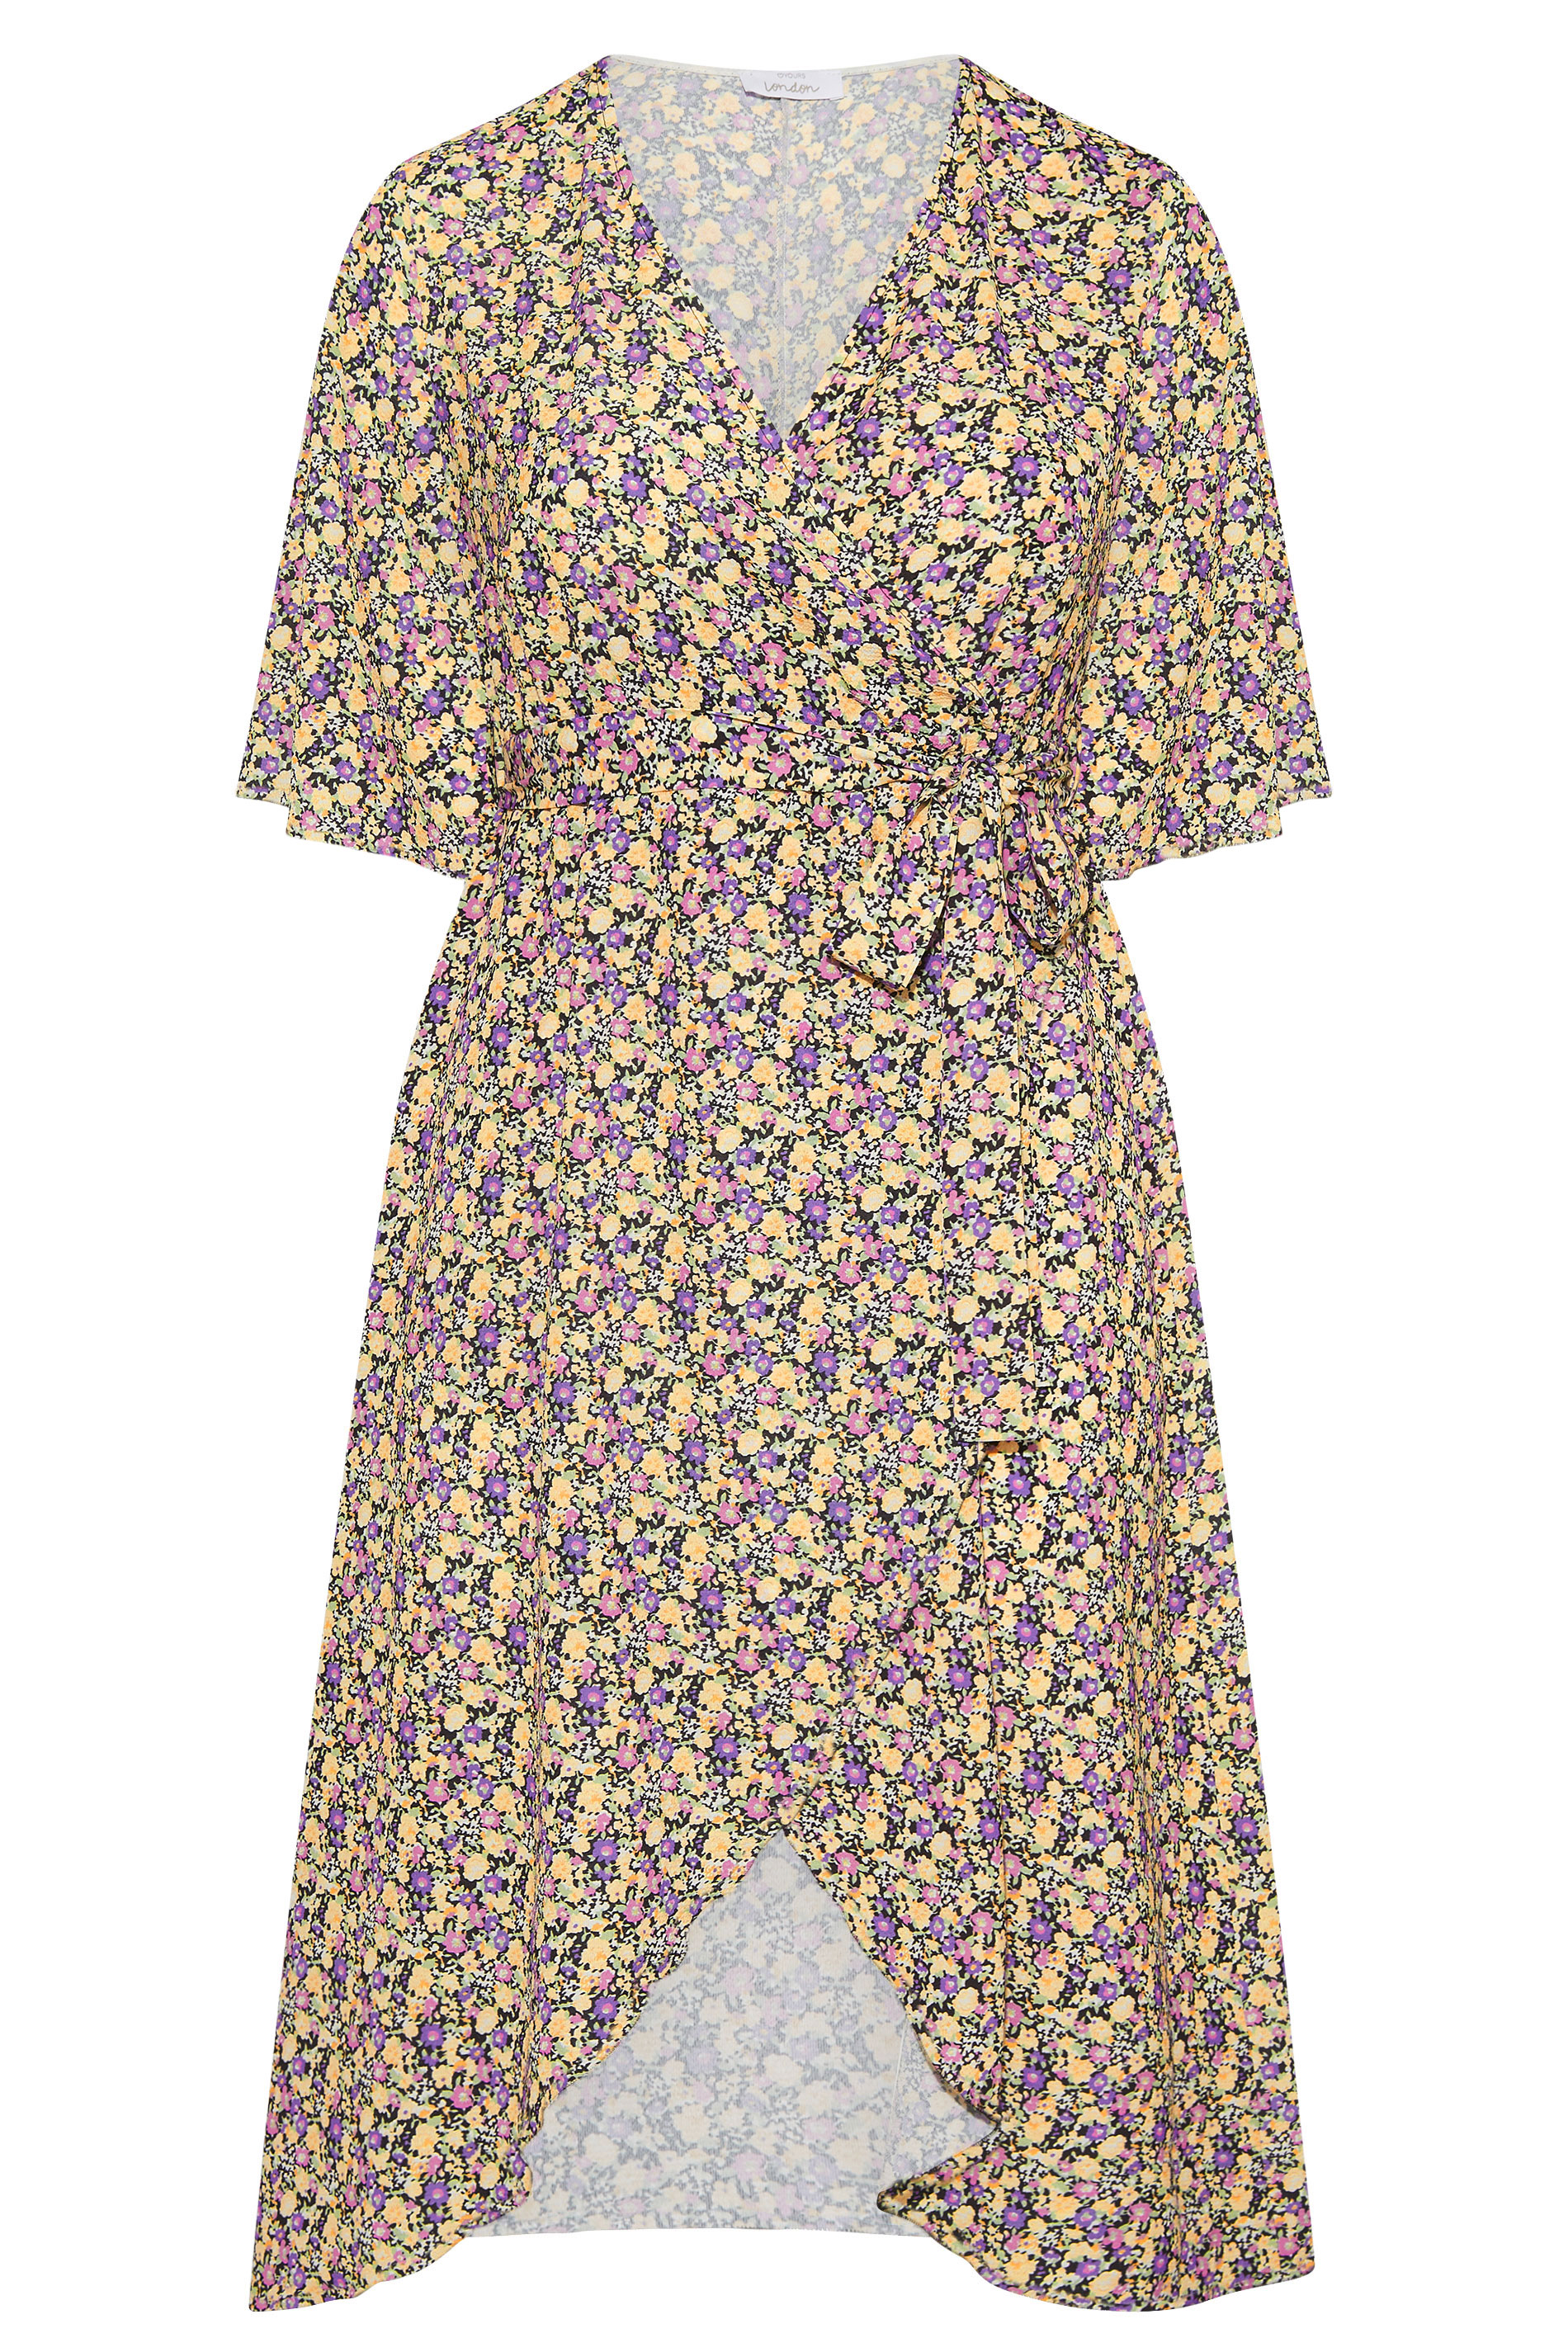 Robes Grande Taille Grande taille  Robes Portefeuilles | YOURS LONDON - Robe Violette Floral Cache-Coeur - BX16739